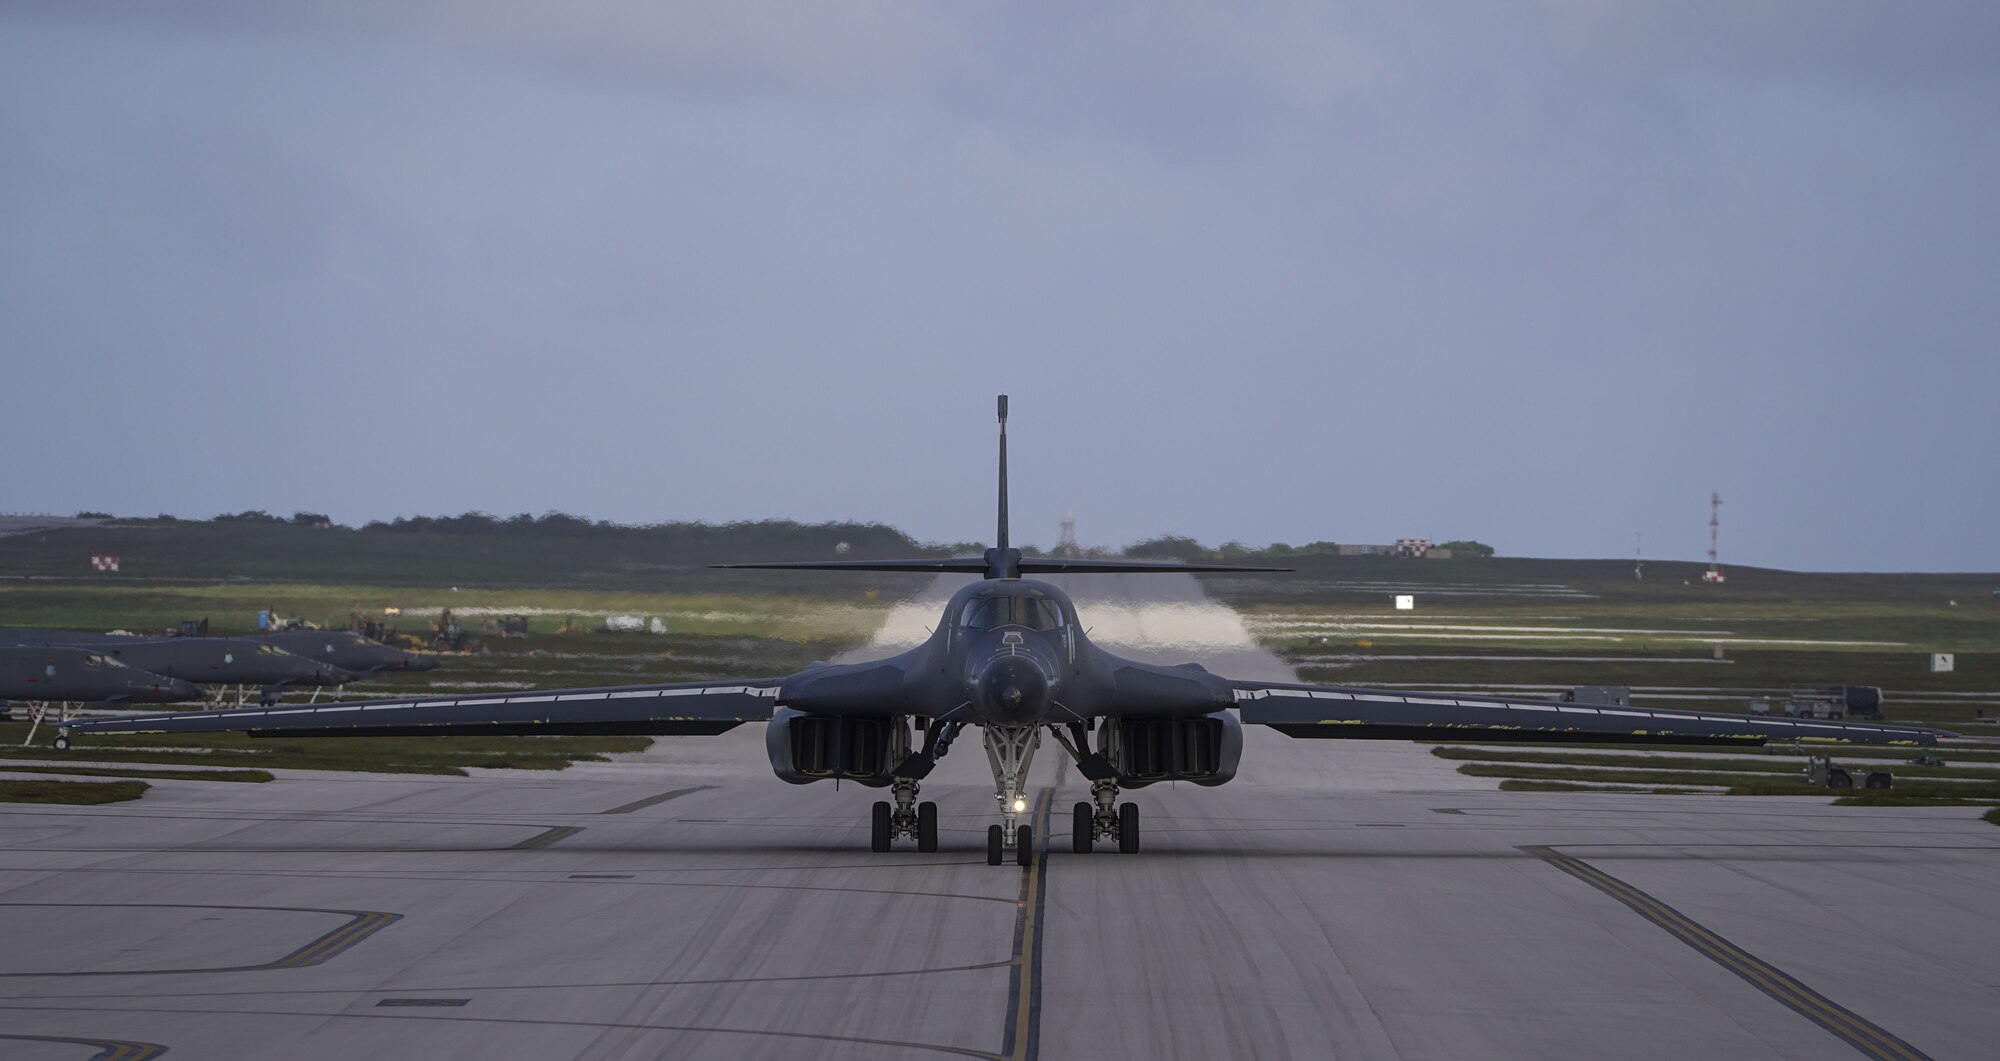 A U.S. Air Force B-1B Lancer, assigned to the 37th Expeditionary Bomb Squadron, deployed from Ellsworth Air Force Base (AFB), South Dakota, arrives at Andersen AFB, Guam, Dec. 4, 2017.